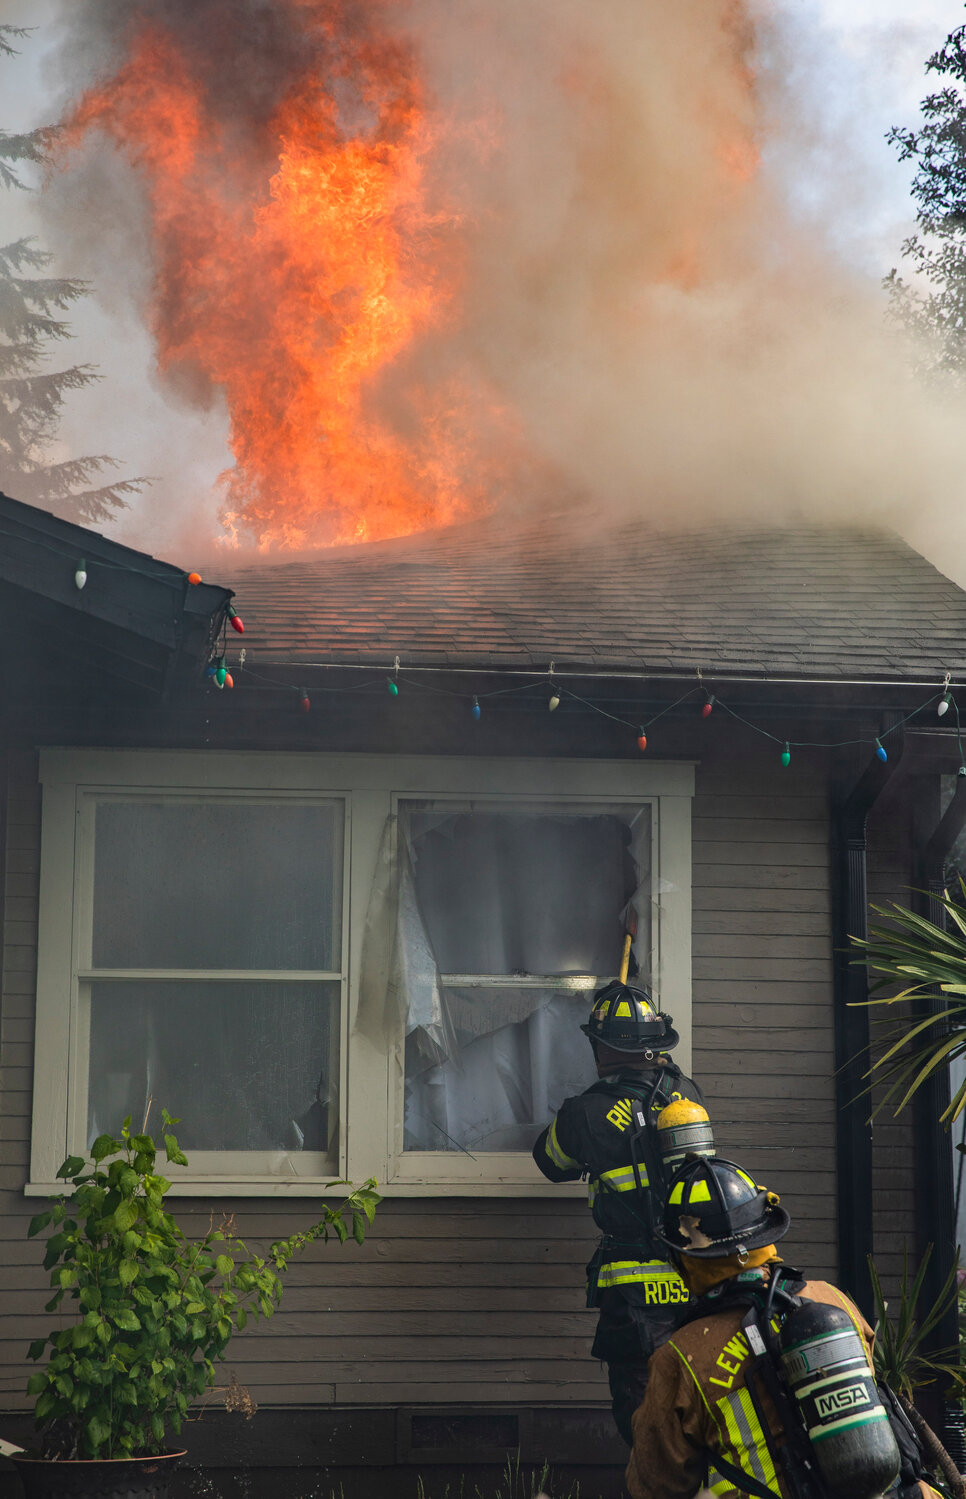 A Riverside firefighter uses an ax to break windows at a residence in the 800 block of Centralia College Blvd. as flames rise from the roof on Wednesday, May 24.